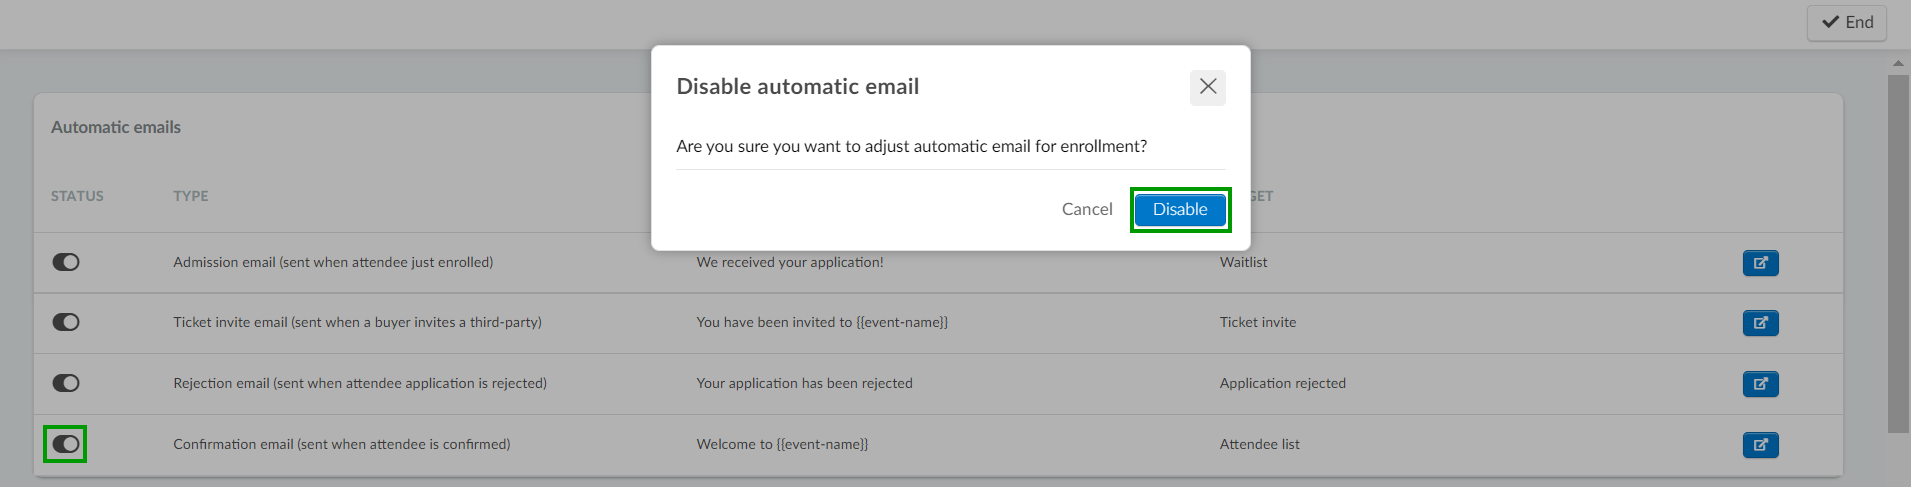 image shows how to disable the automatic emails